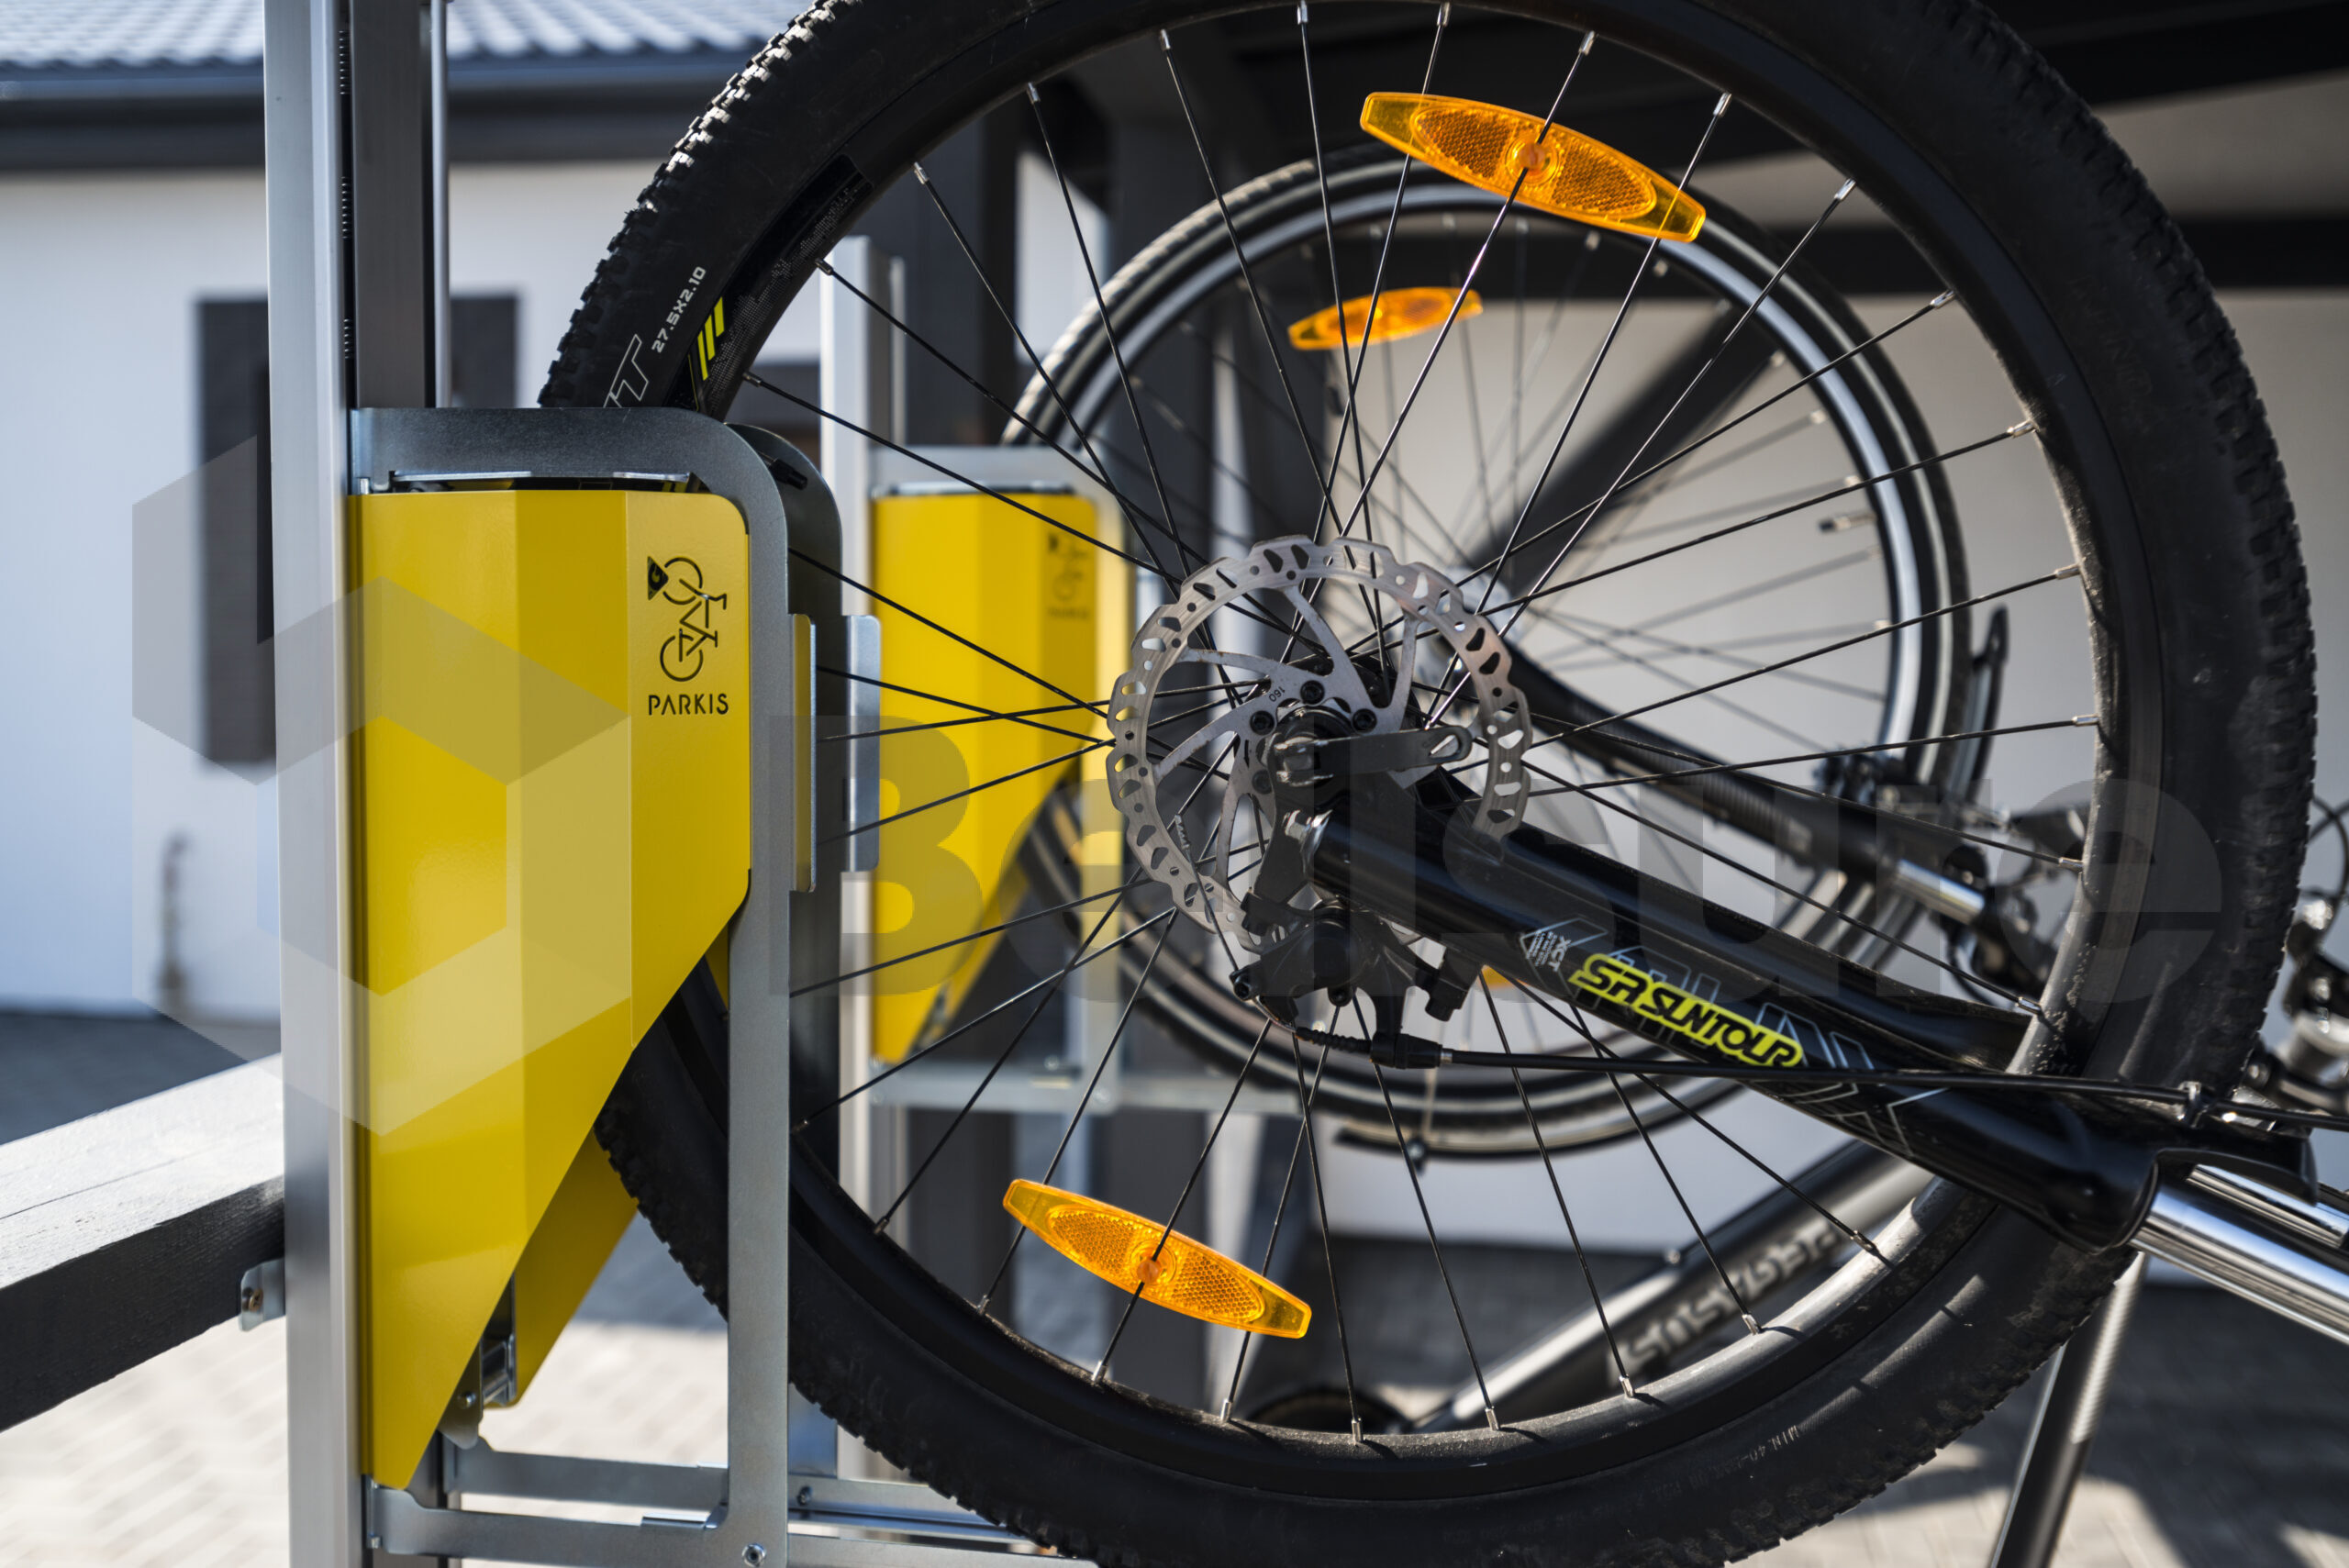 Parkis Is the New Vertical Bike Rack You’ve Been Looking For | Sharp ...